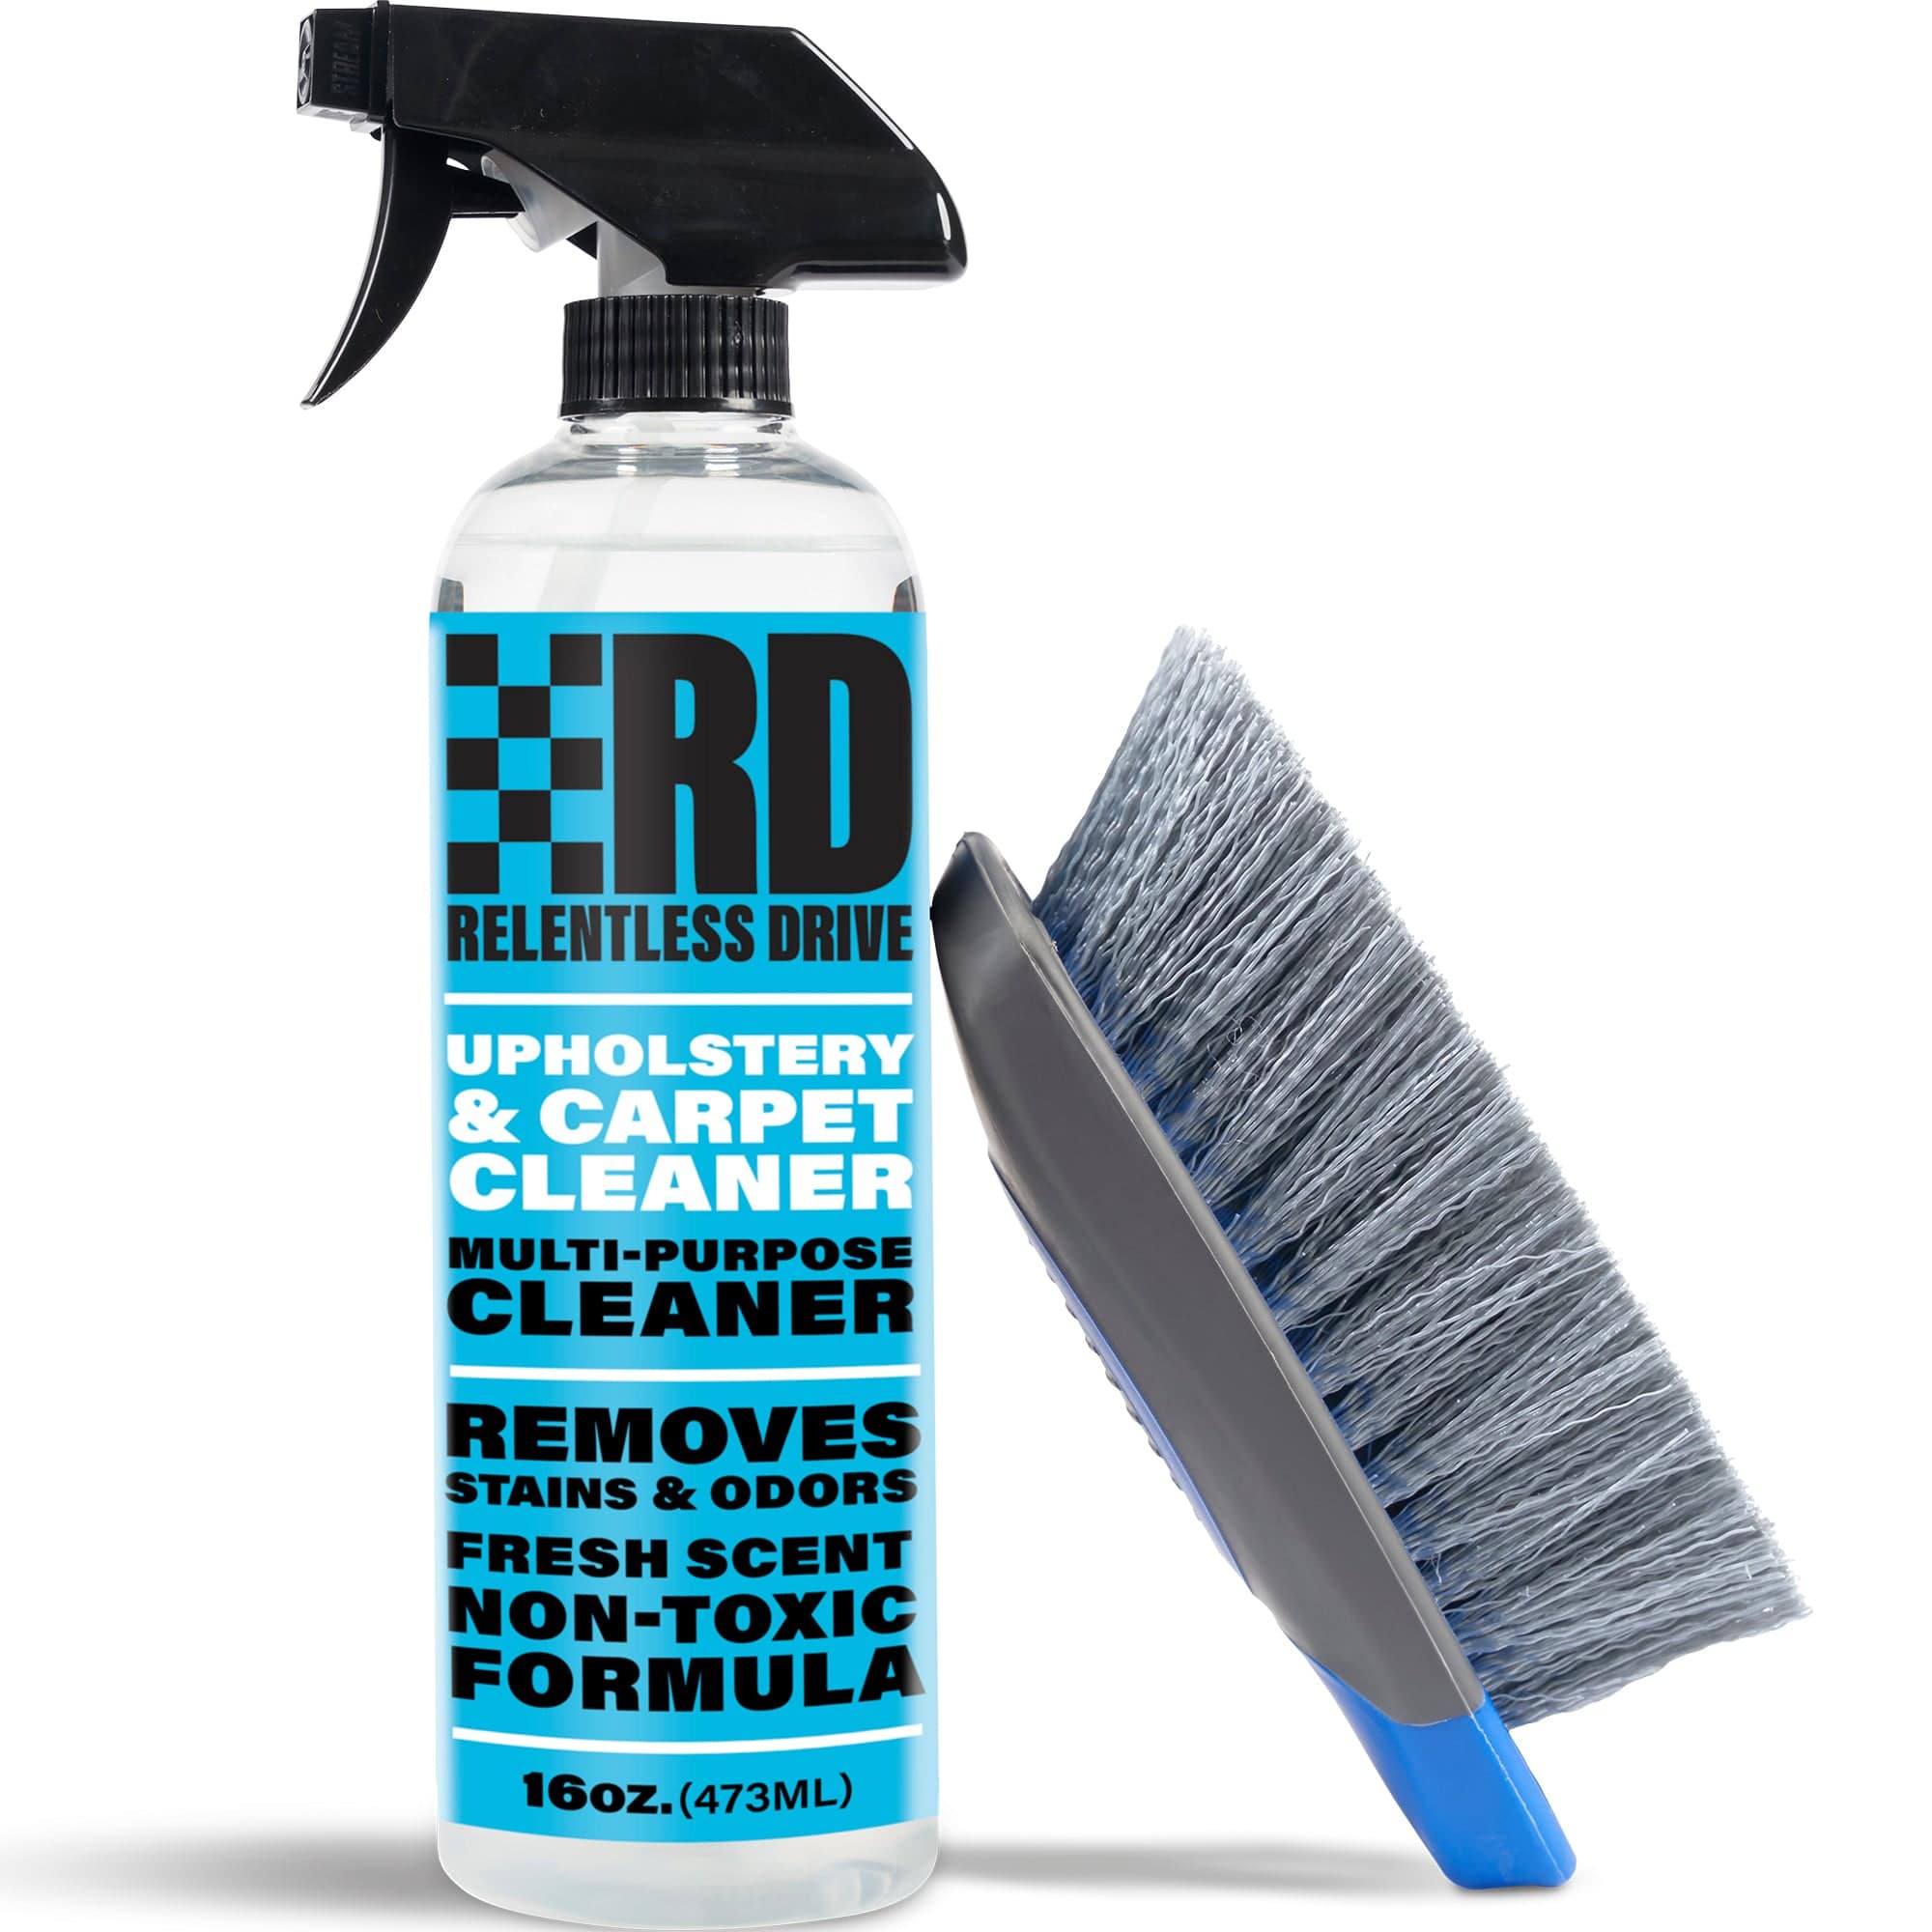 https://relentless-drive.com/cdn/shop/files/relentless-drive-car-upholstery-cleaner-kit-car-seat-cleaner-car-carpet-cleaner-works-great-on-stains-keep-car-interior-smelling-fresh-car-interior-cleaner-relentless-drive-microfiber_dade04fd-f709-4fc0-bc54-82206f26aa41_2000x.jpg?v=1686666837